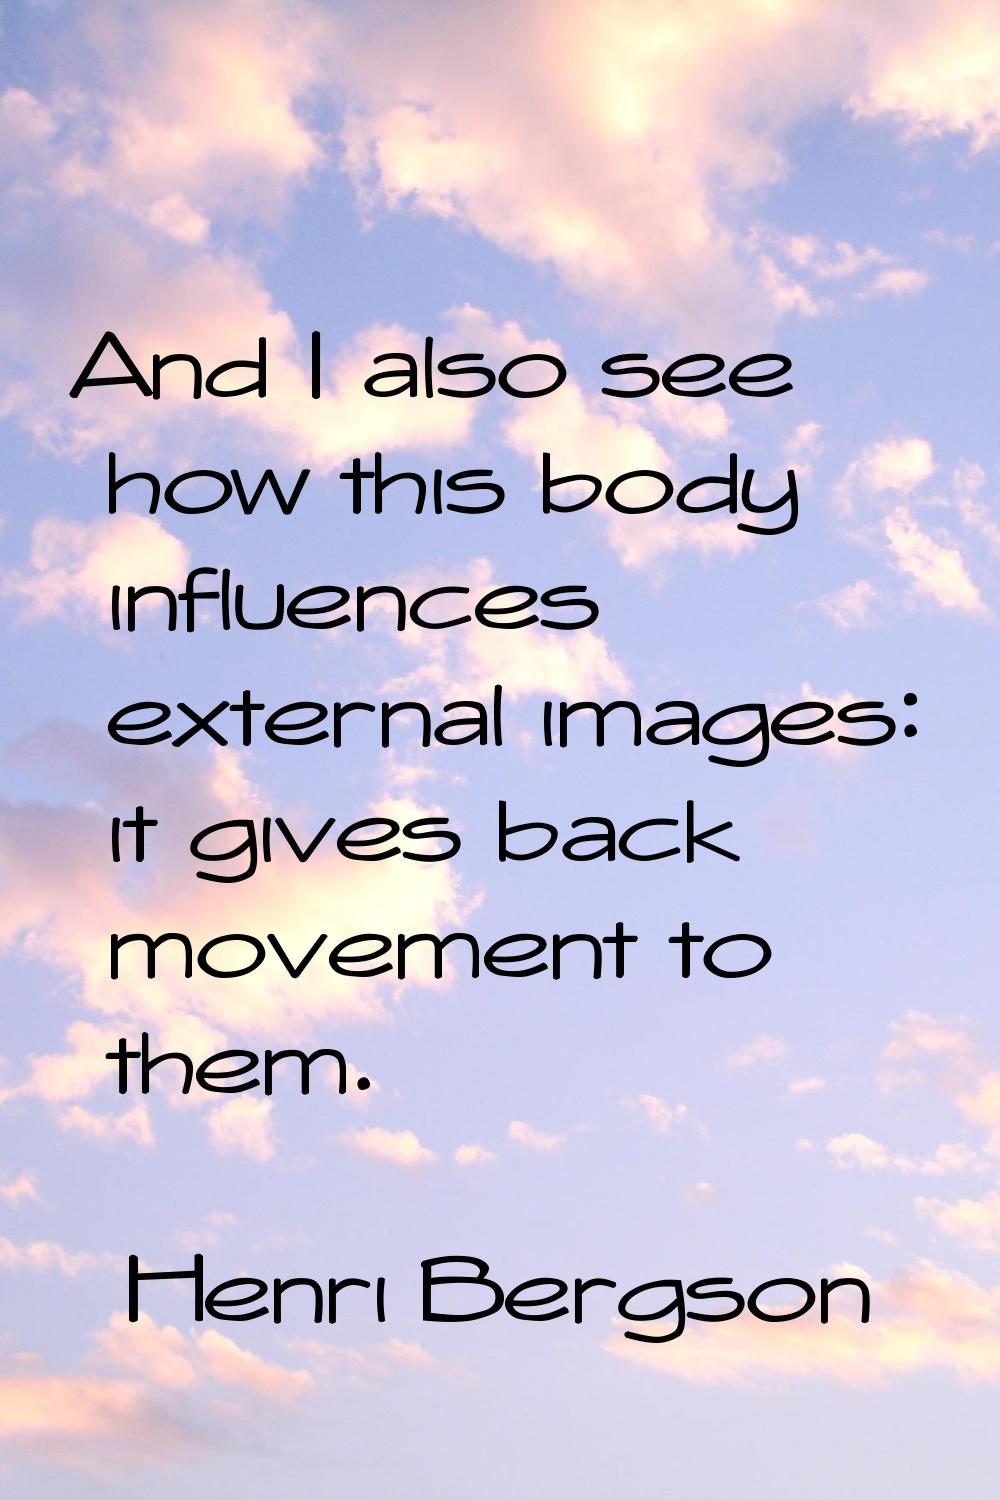 And I also see how this body influences external images: it gives back movement to them.